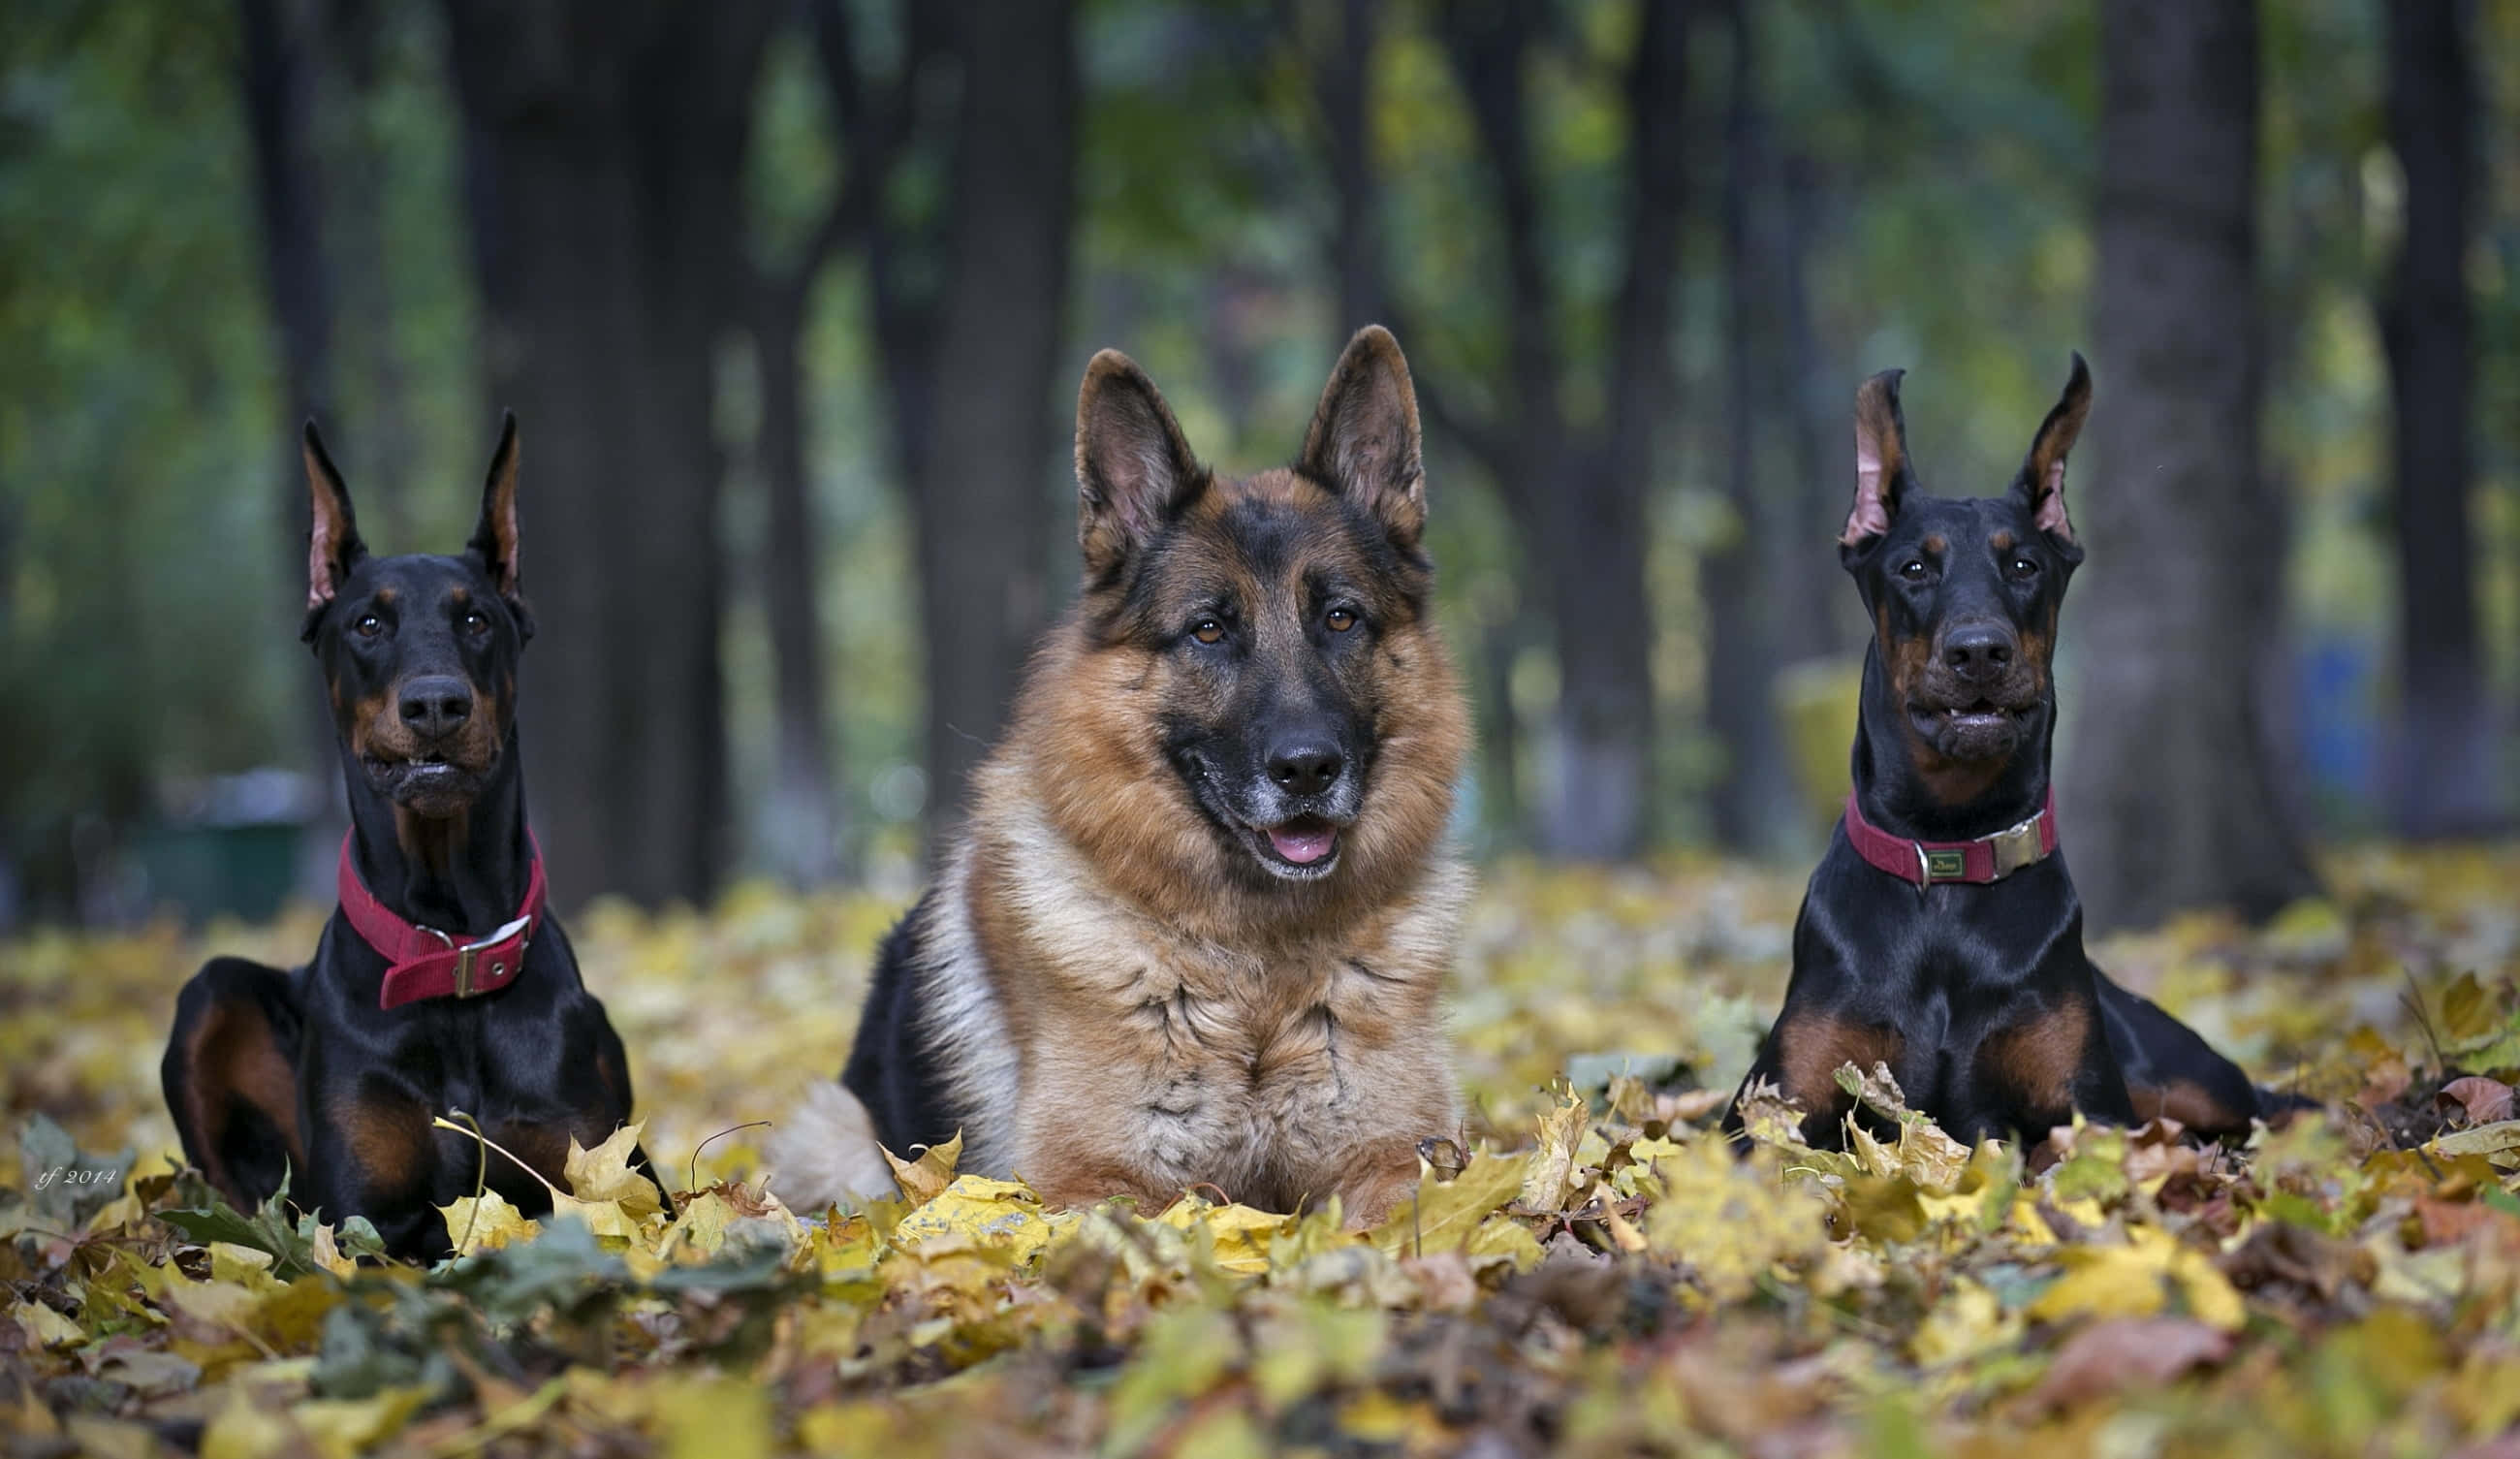 Celebrate the bond between human and canine with a loyal German Shepherd